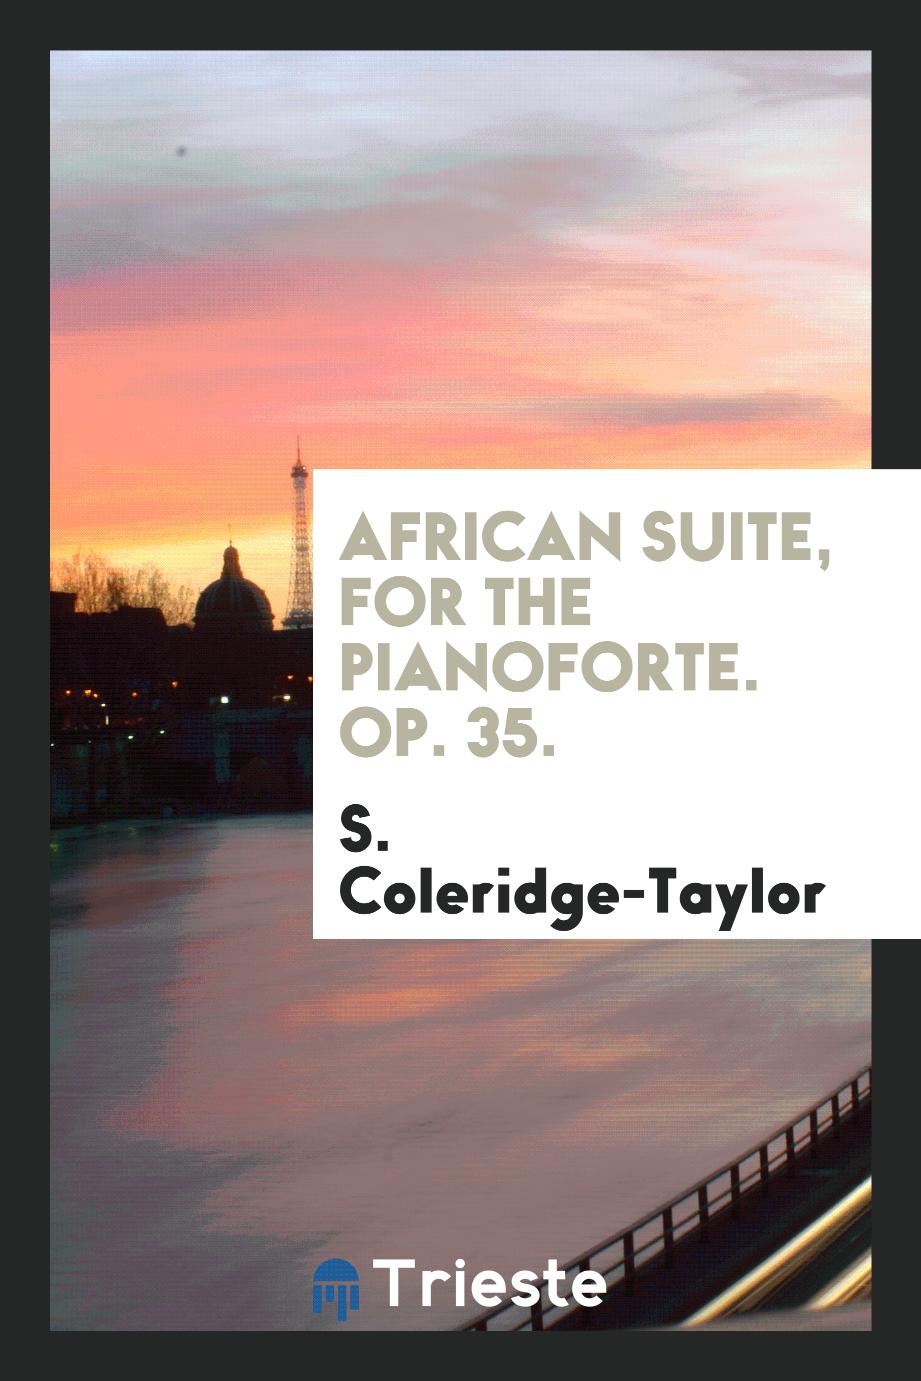 African suite, for the pianoforte. Op. 35.